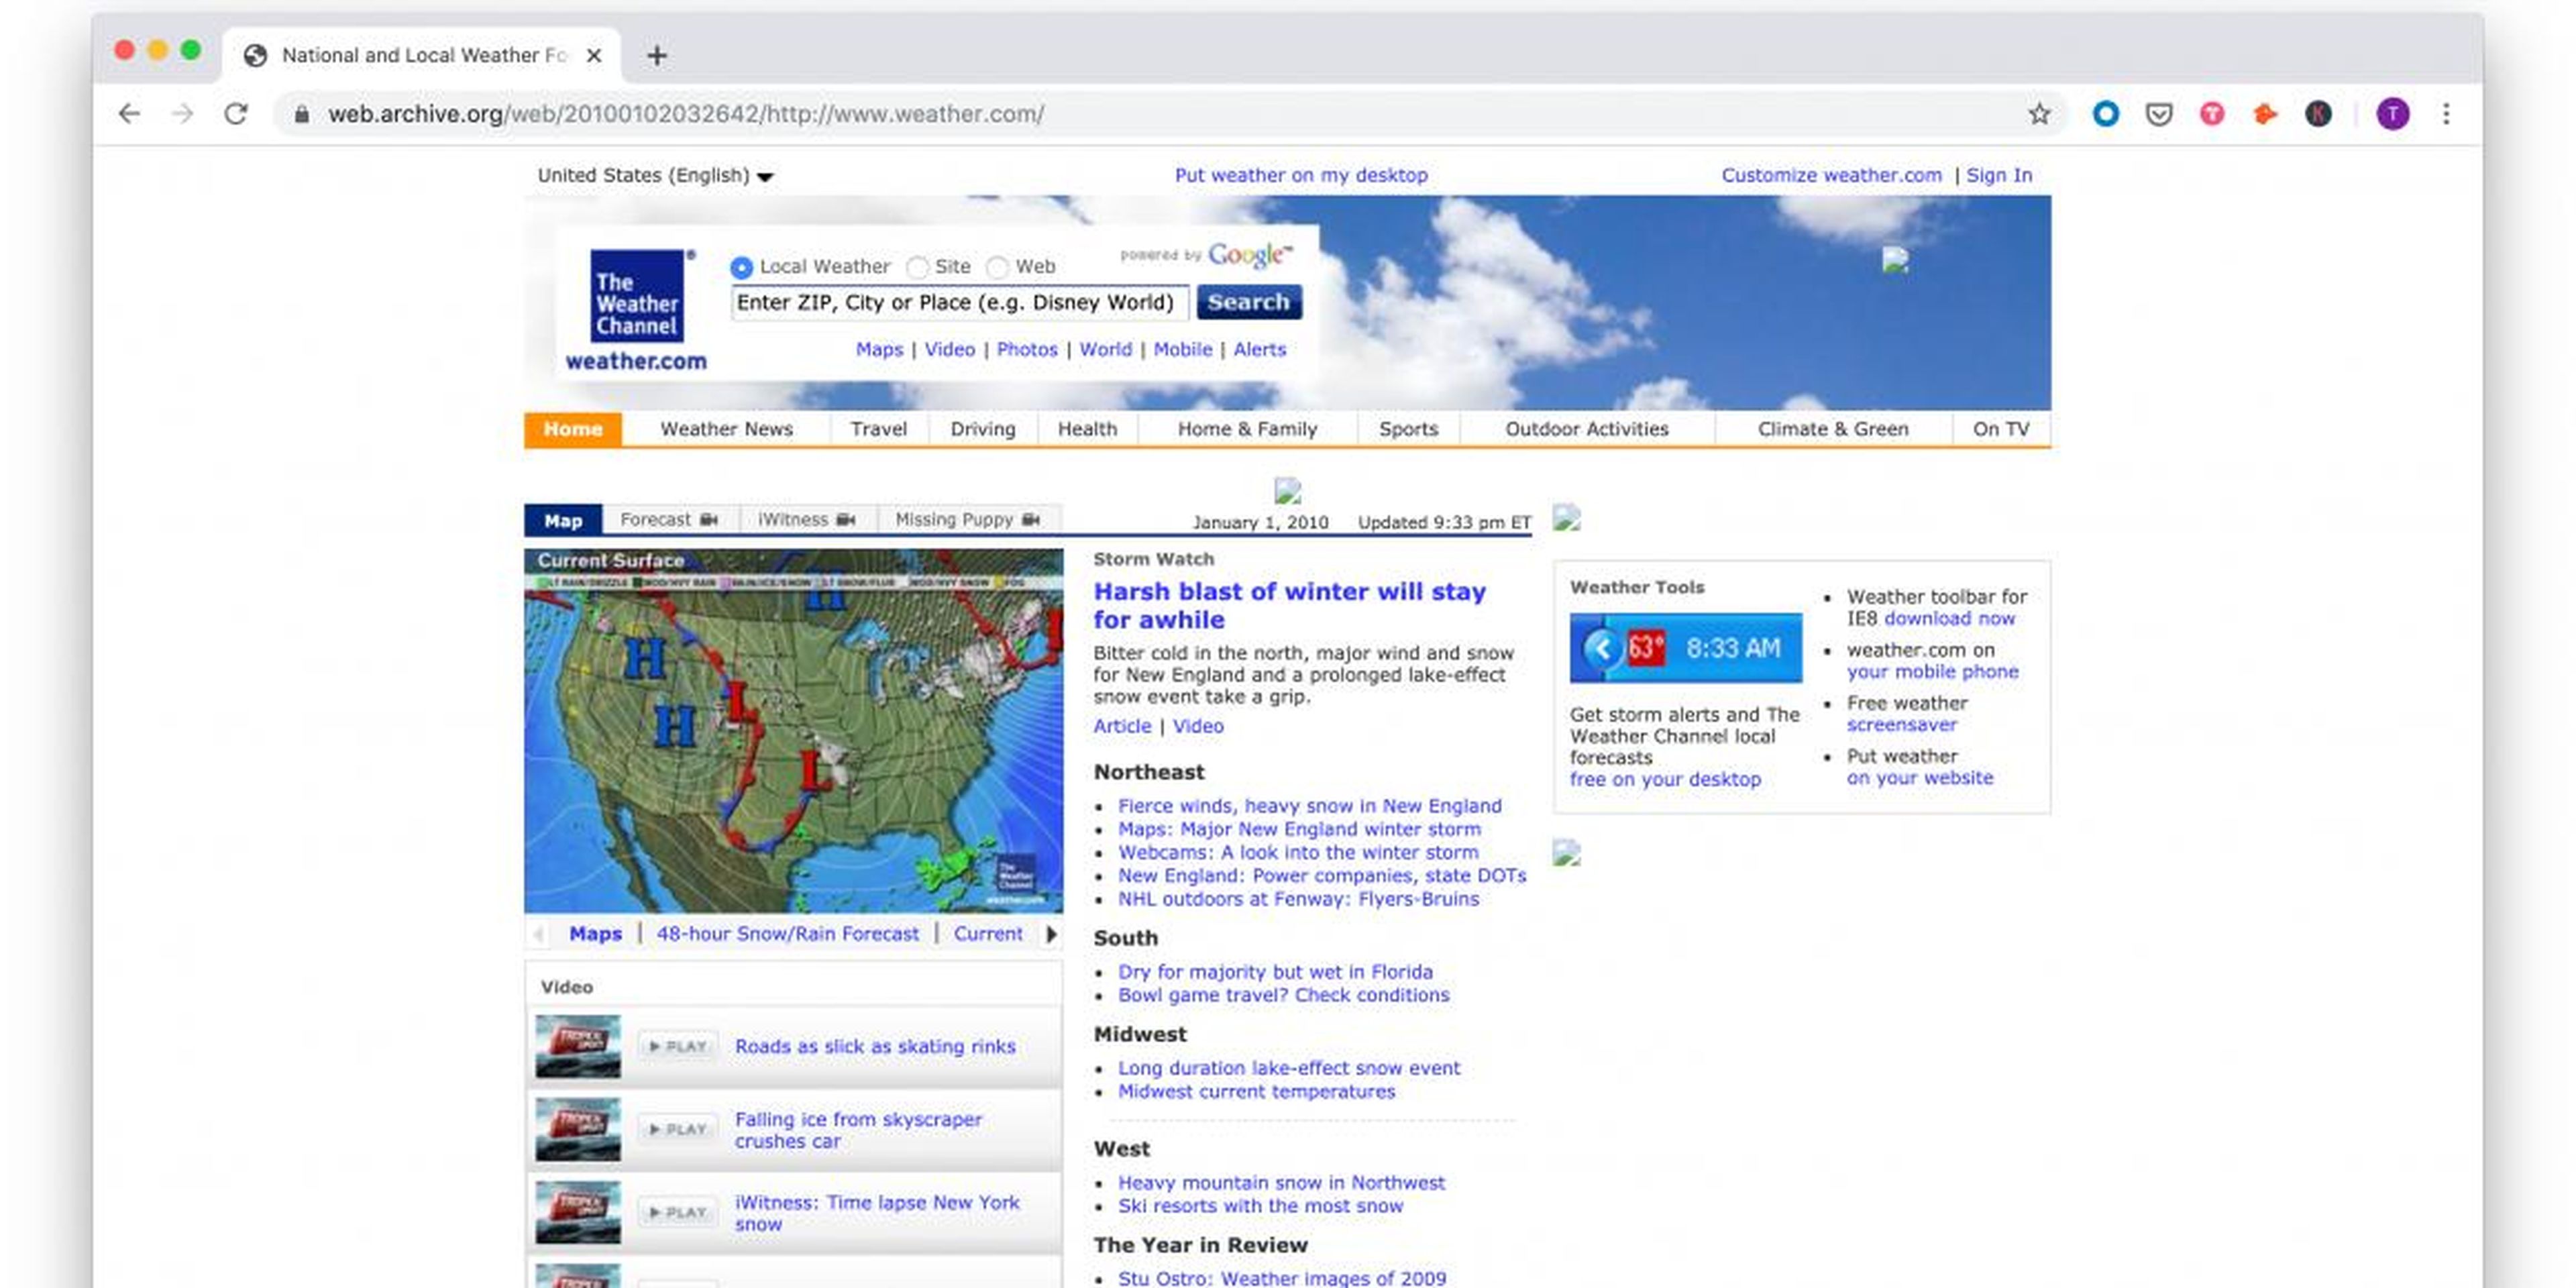 The Weather Channel, 2010